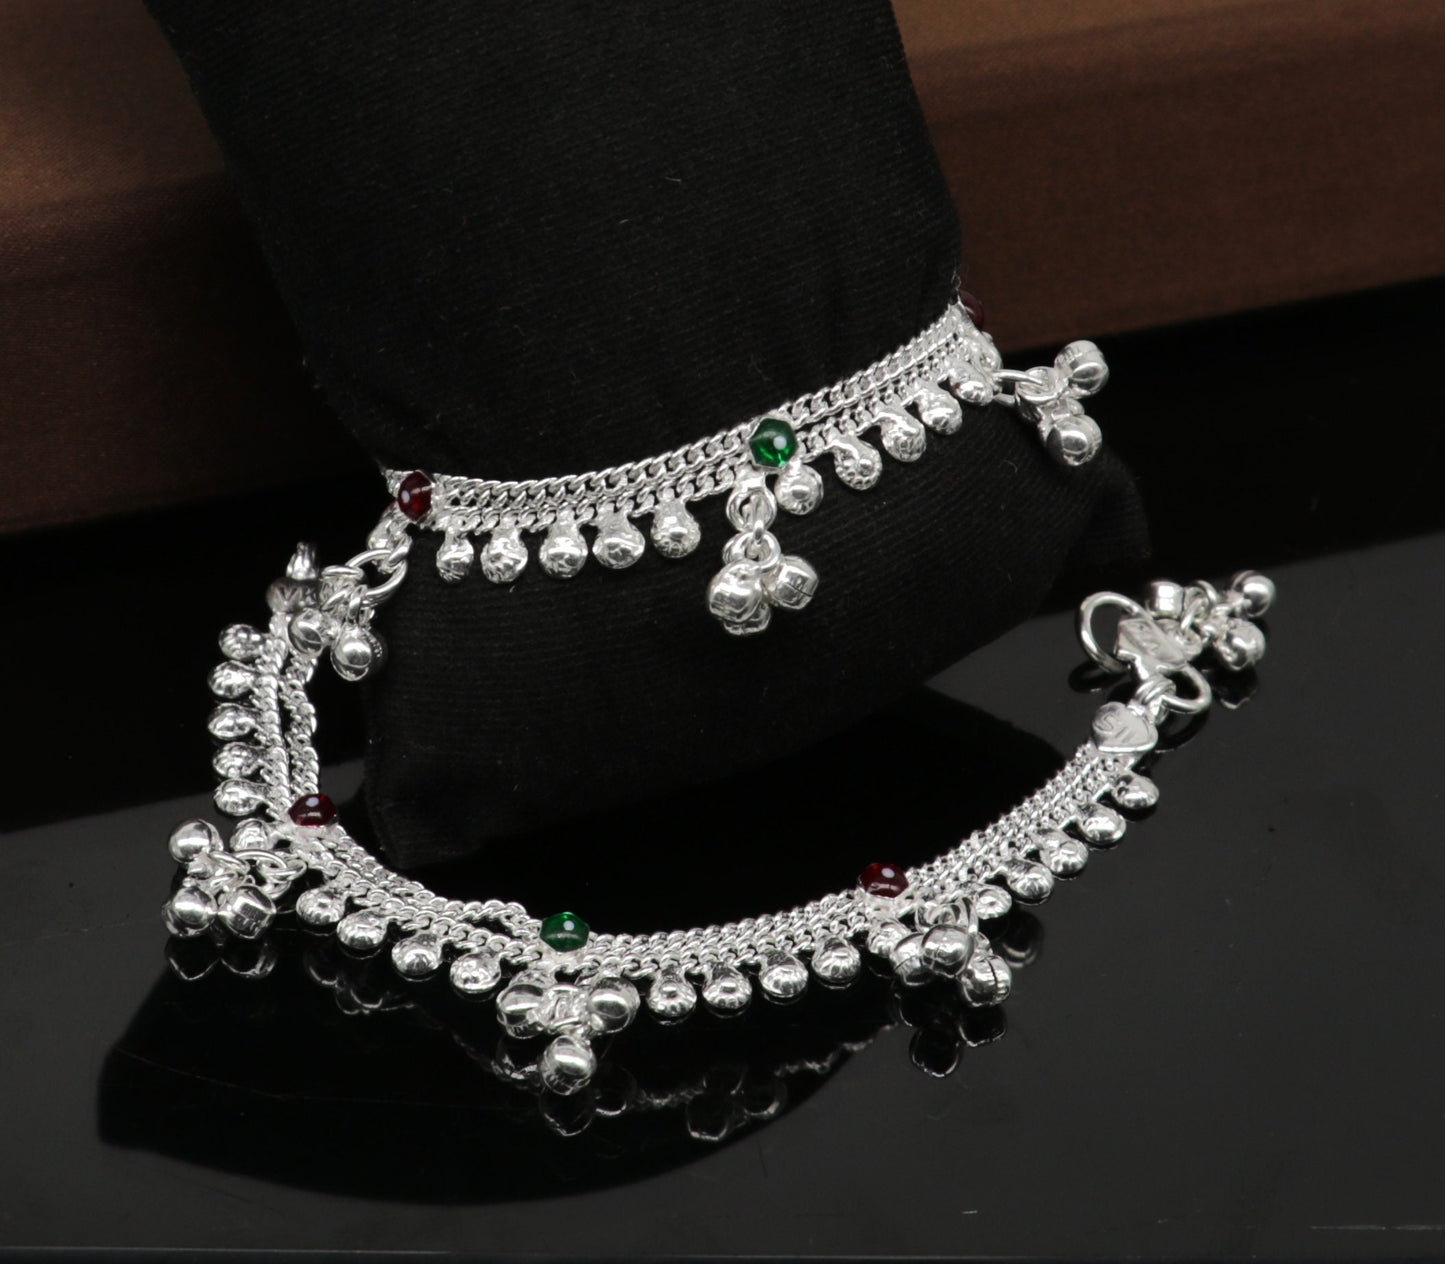 5.5" inches baby anklets Sterling silver handmade amazing ankle bracelet kids anklet noisy sound bells charm anklets jewelry india ank413 - TRIBAL ORNAMENTS